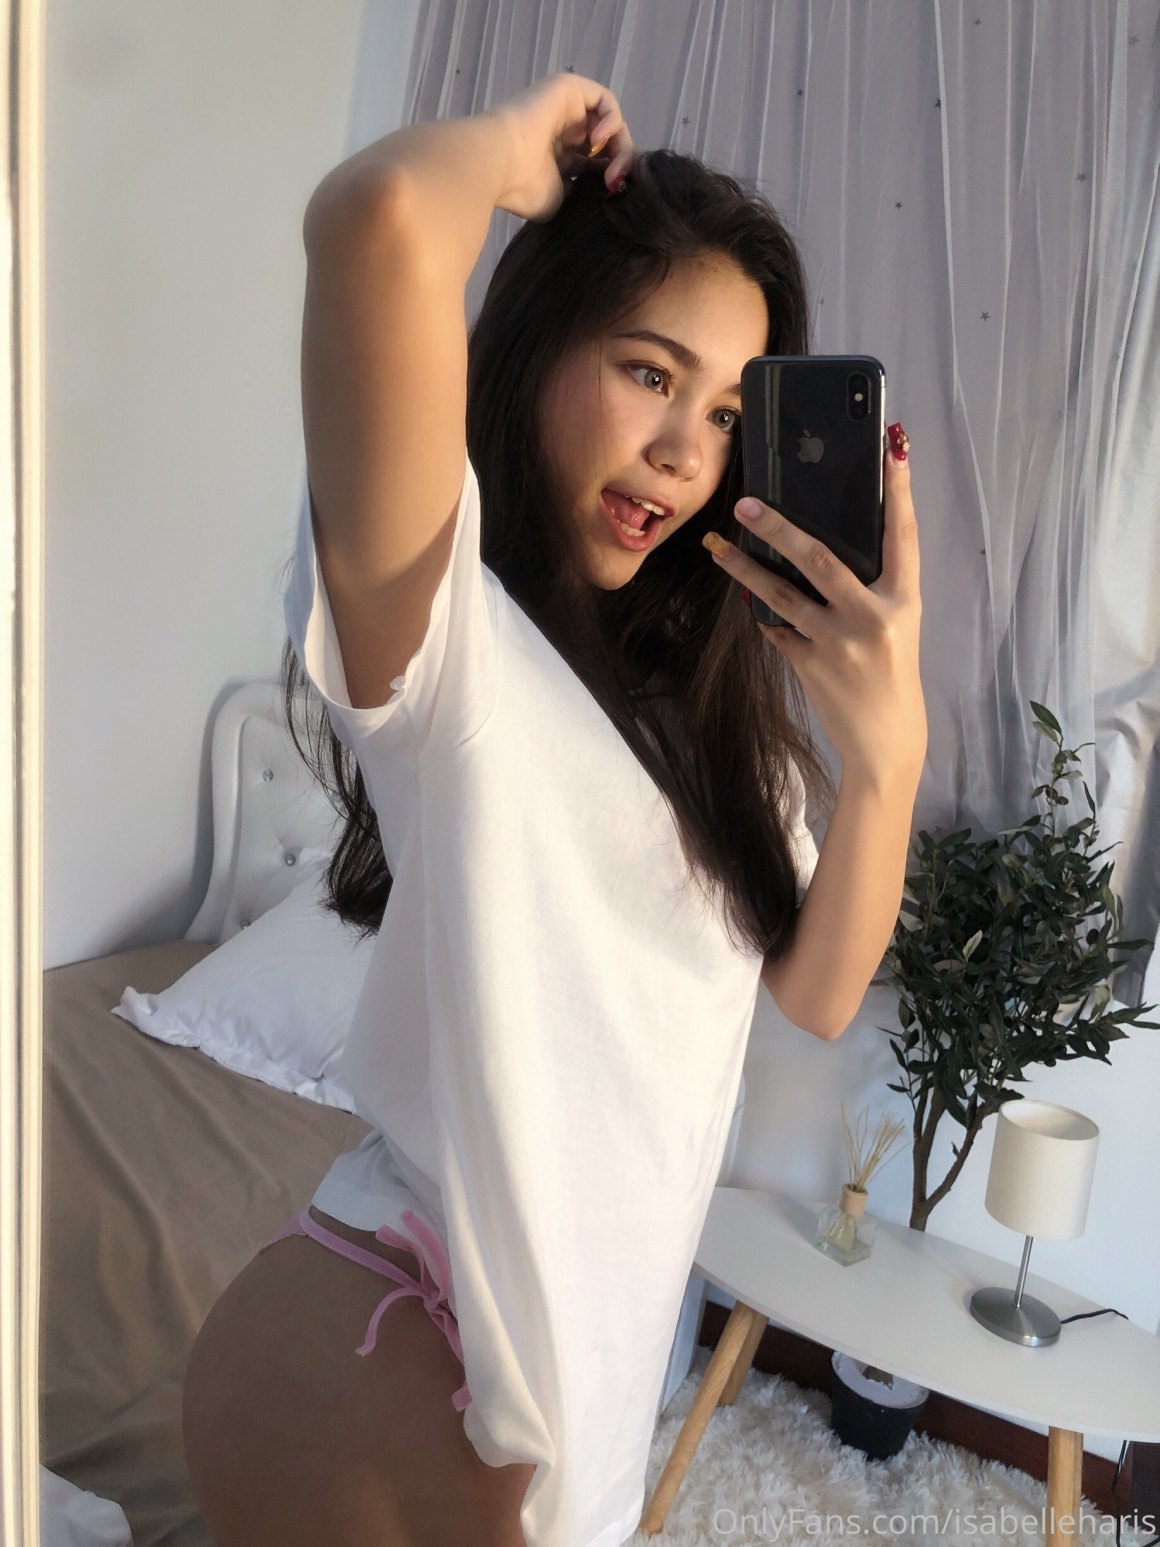 AsianOnlyfans 270 547 20211024